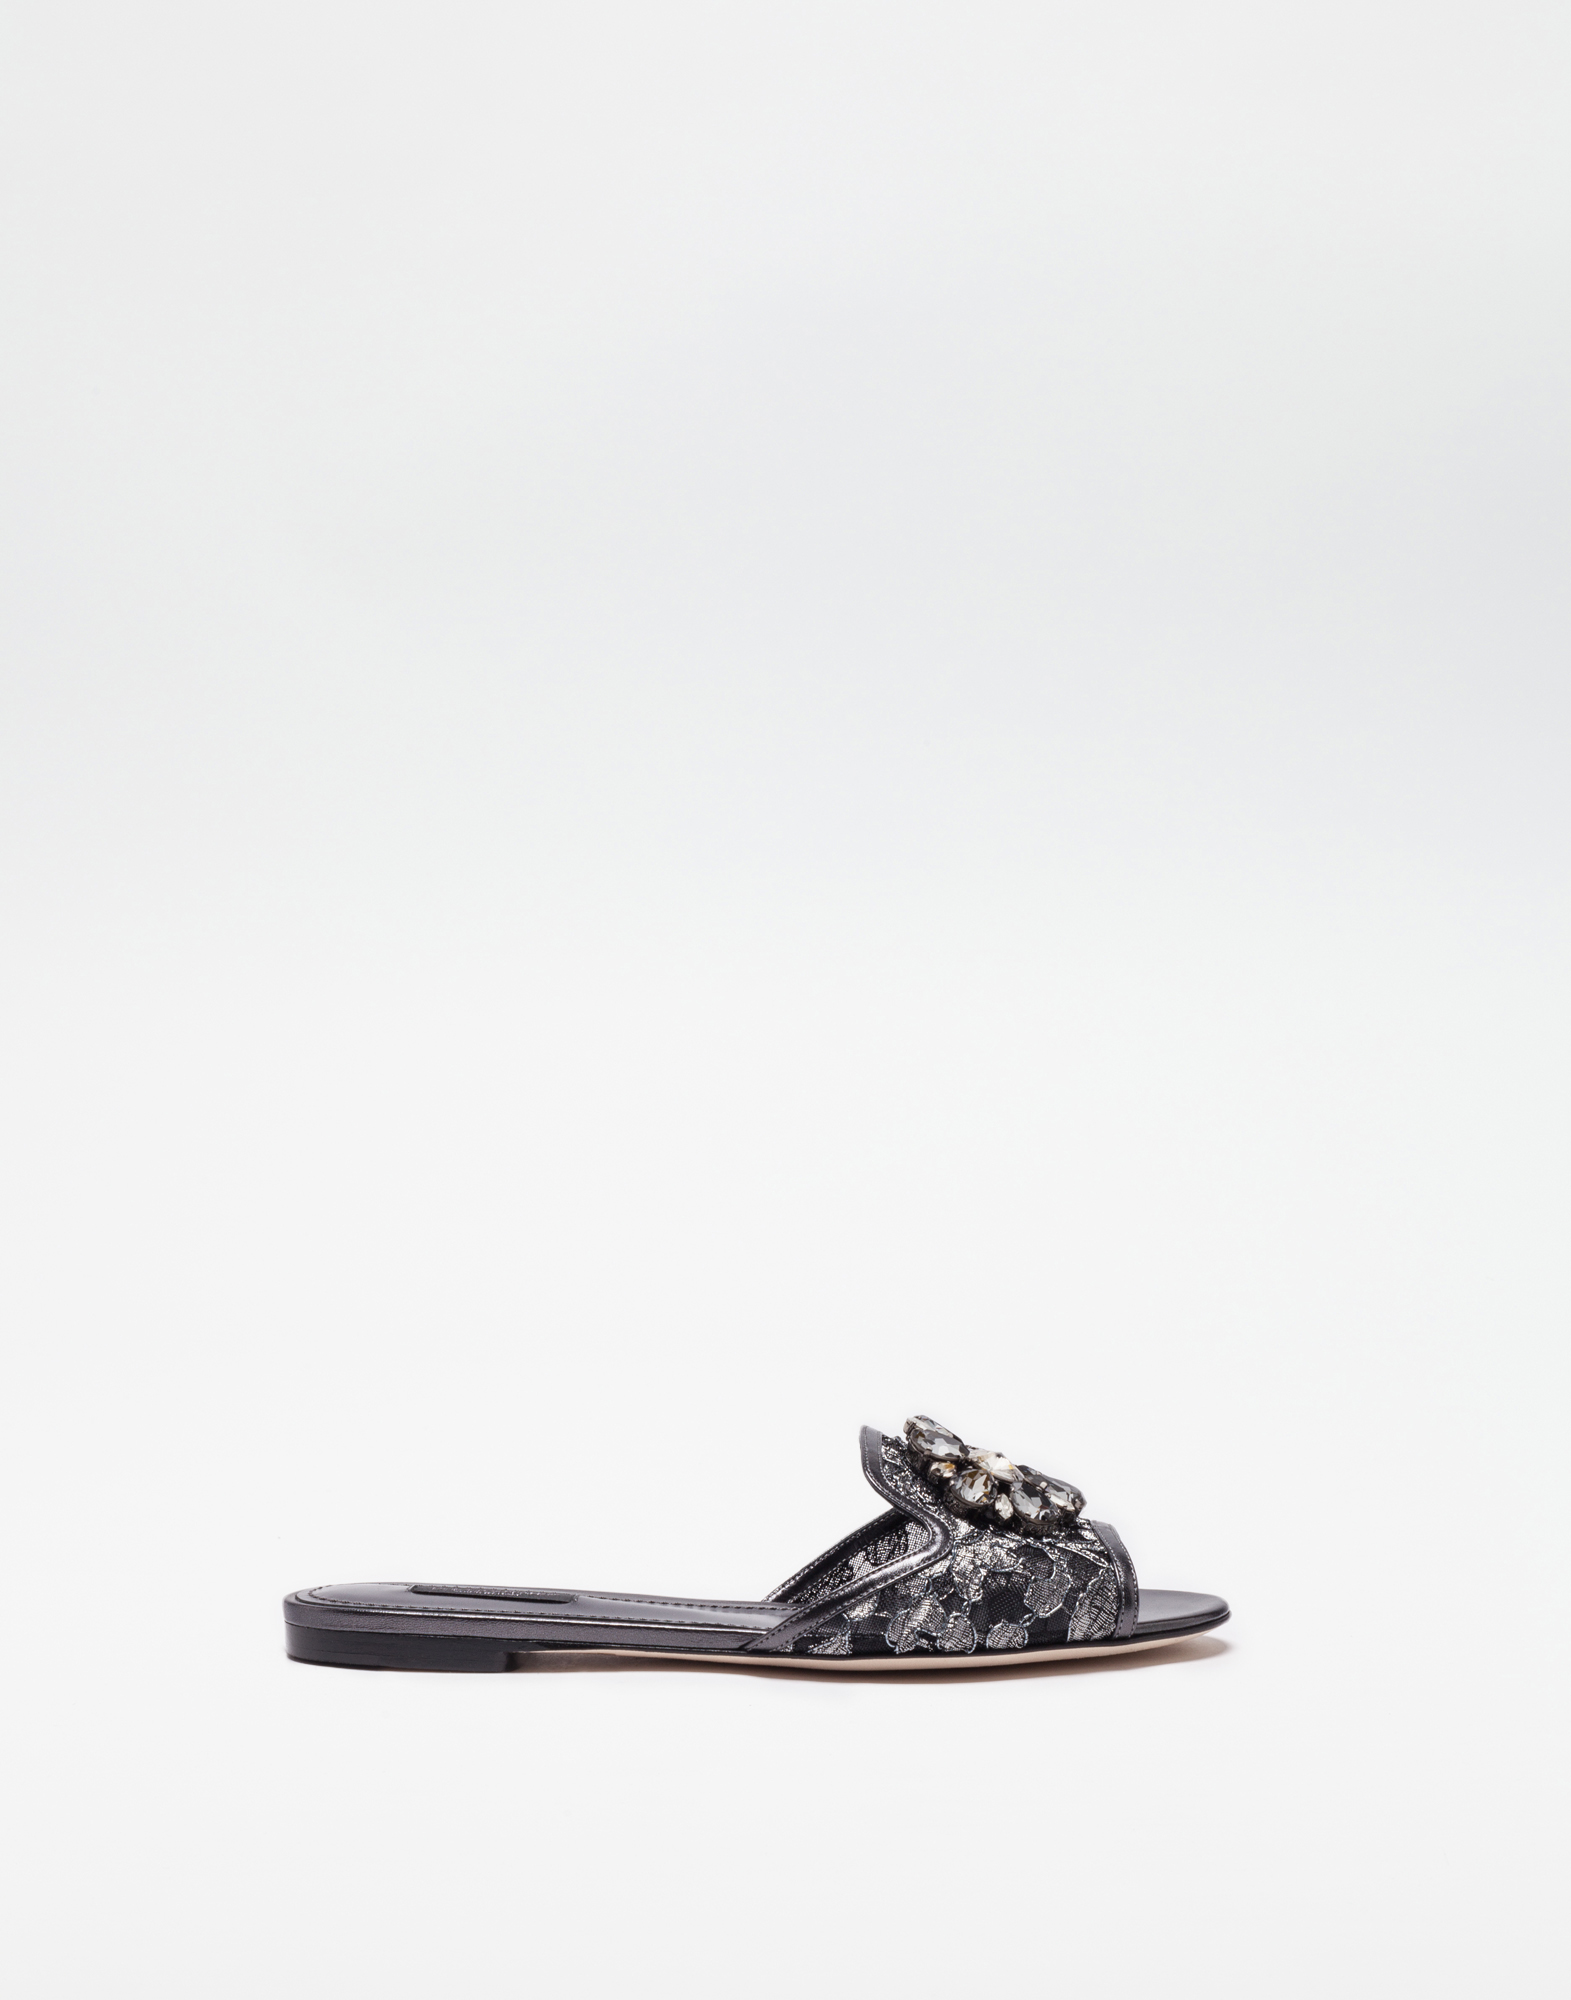 Lurex lace rainbow slides with brooch detailing in Grey